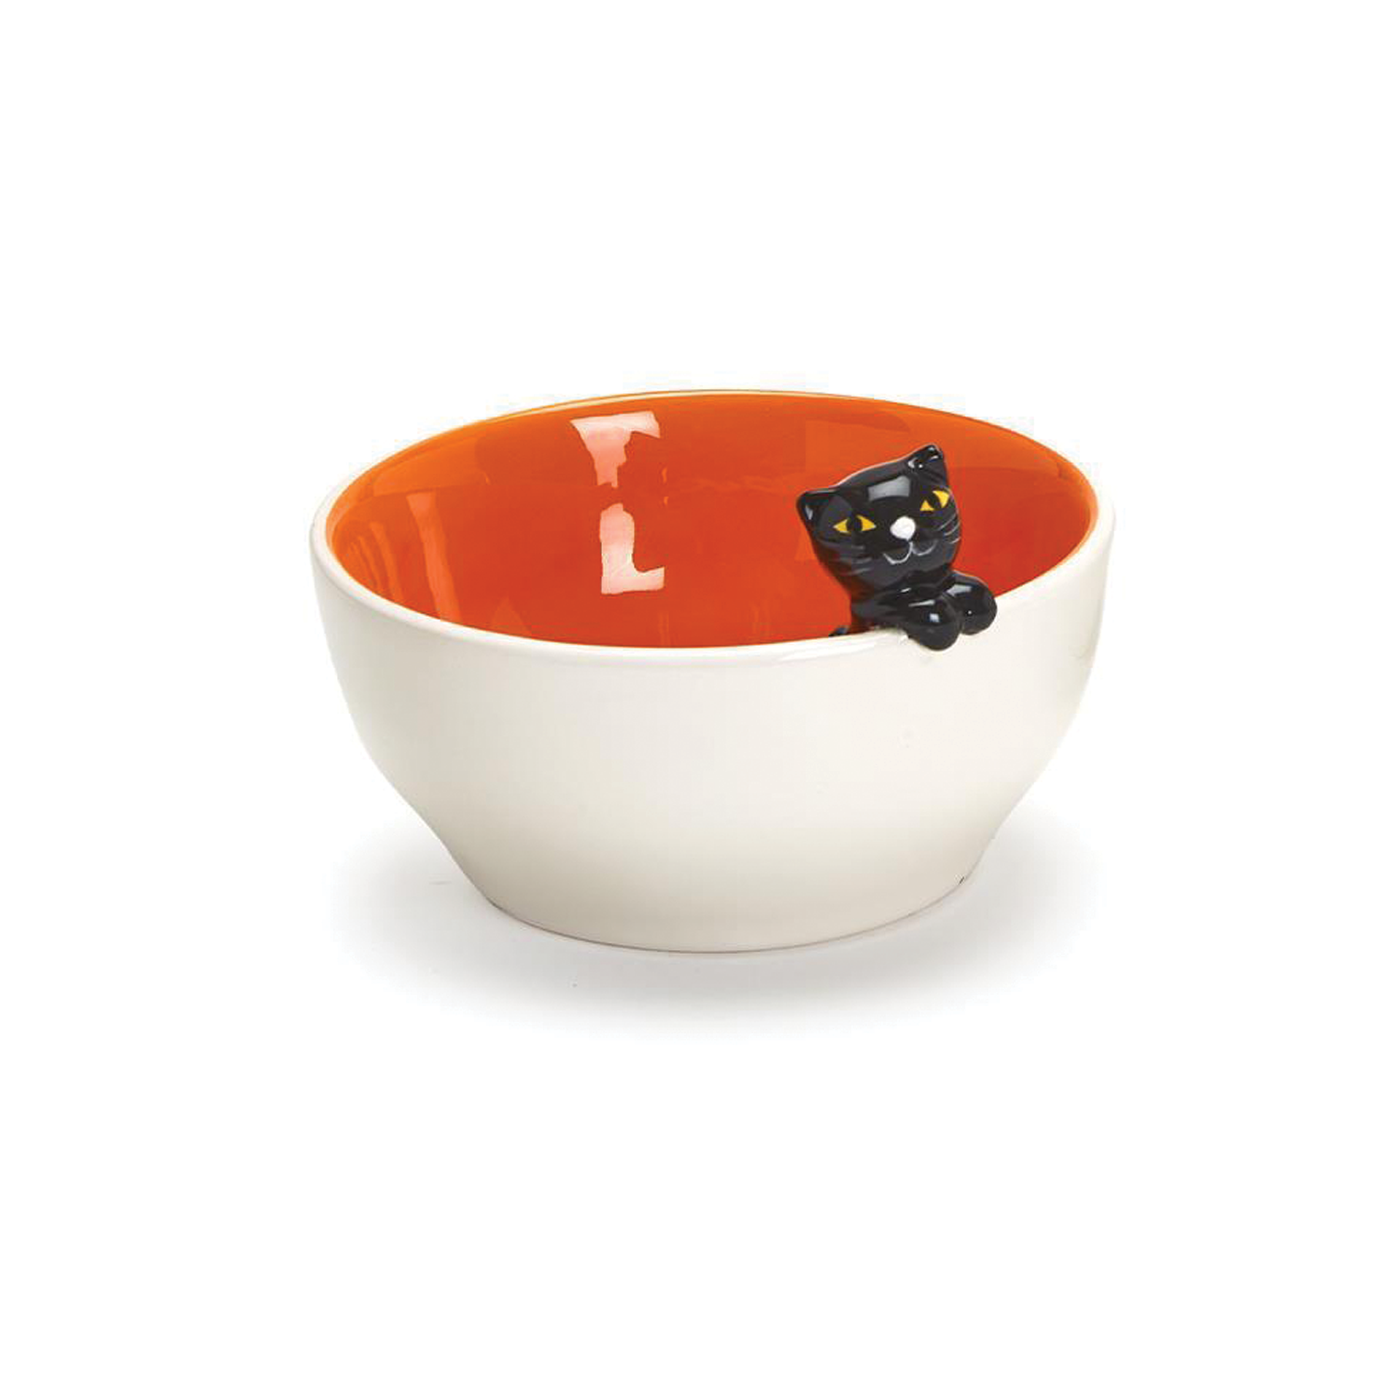 Boo Buddies Hand Painted Bowl - Cat